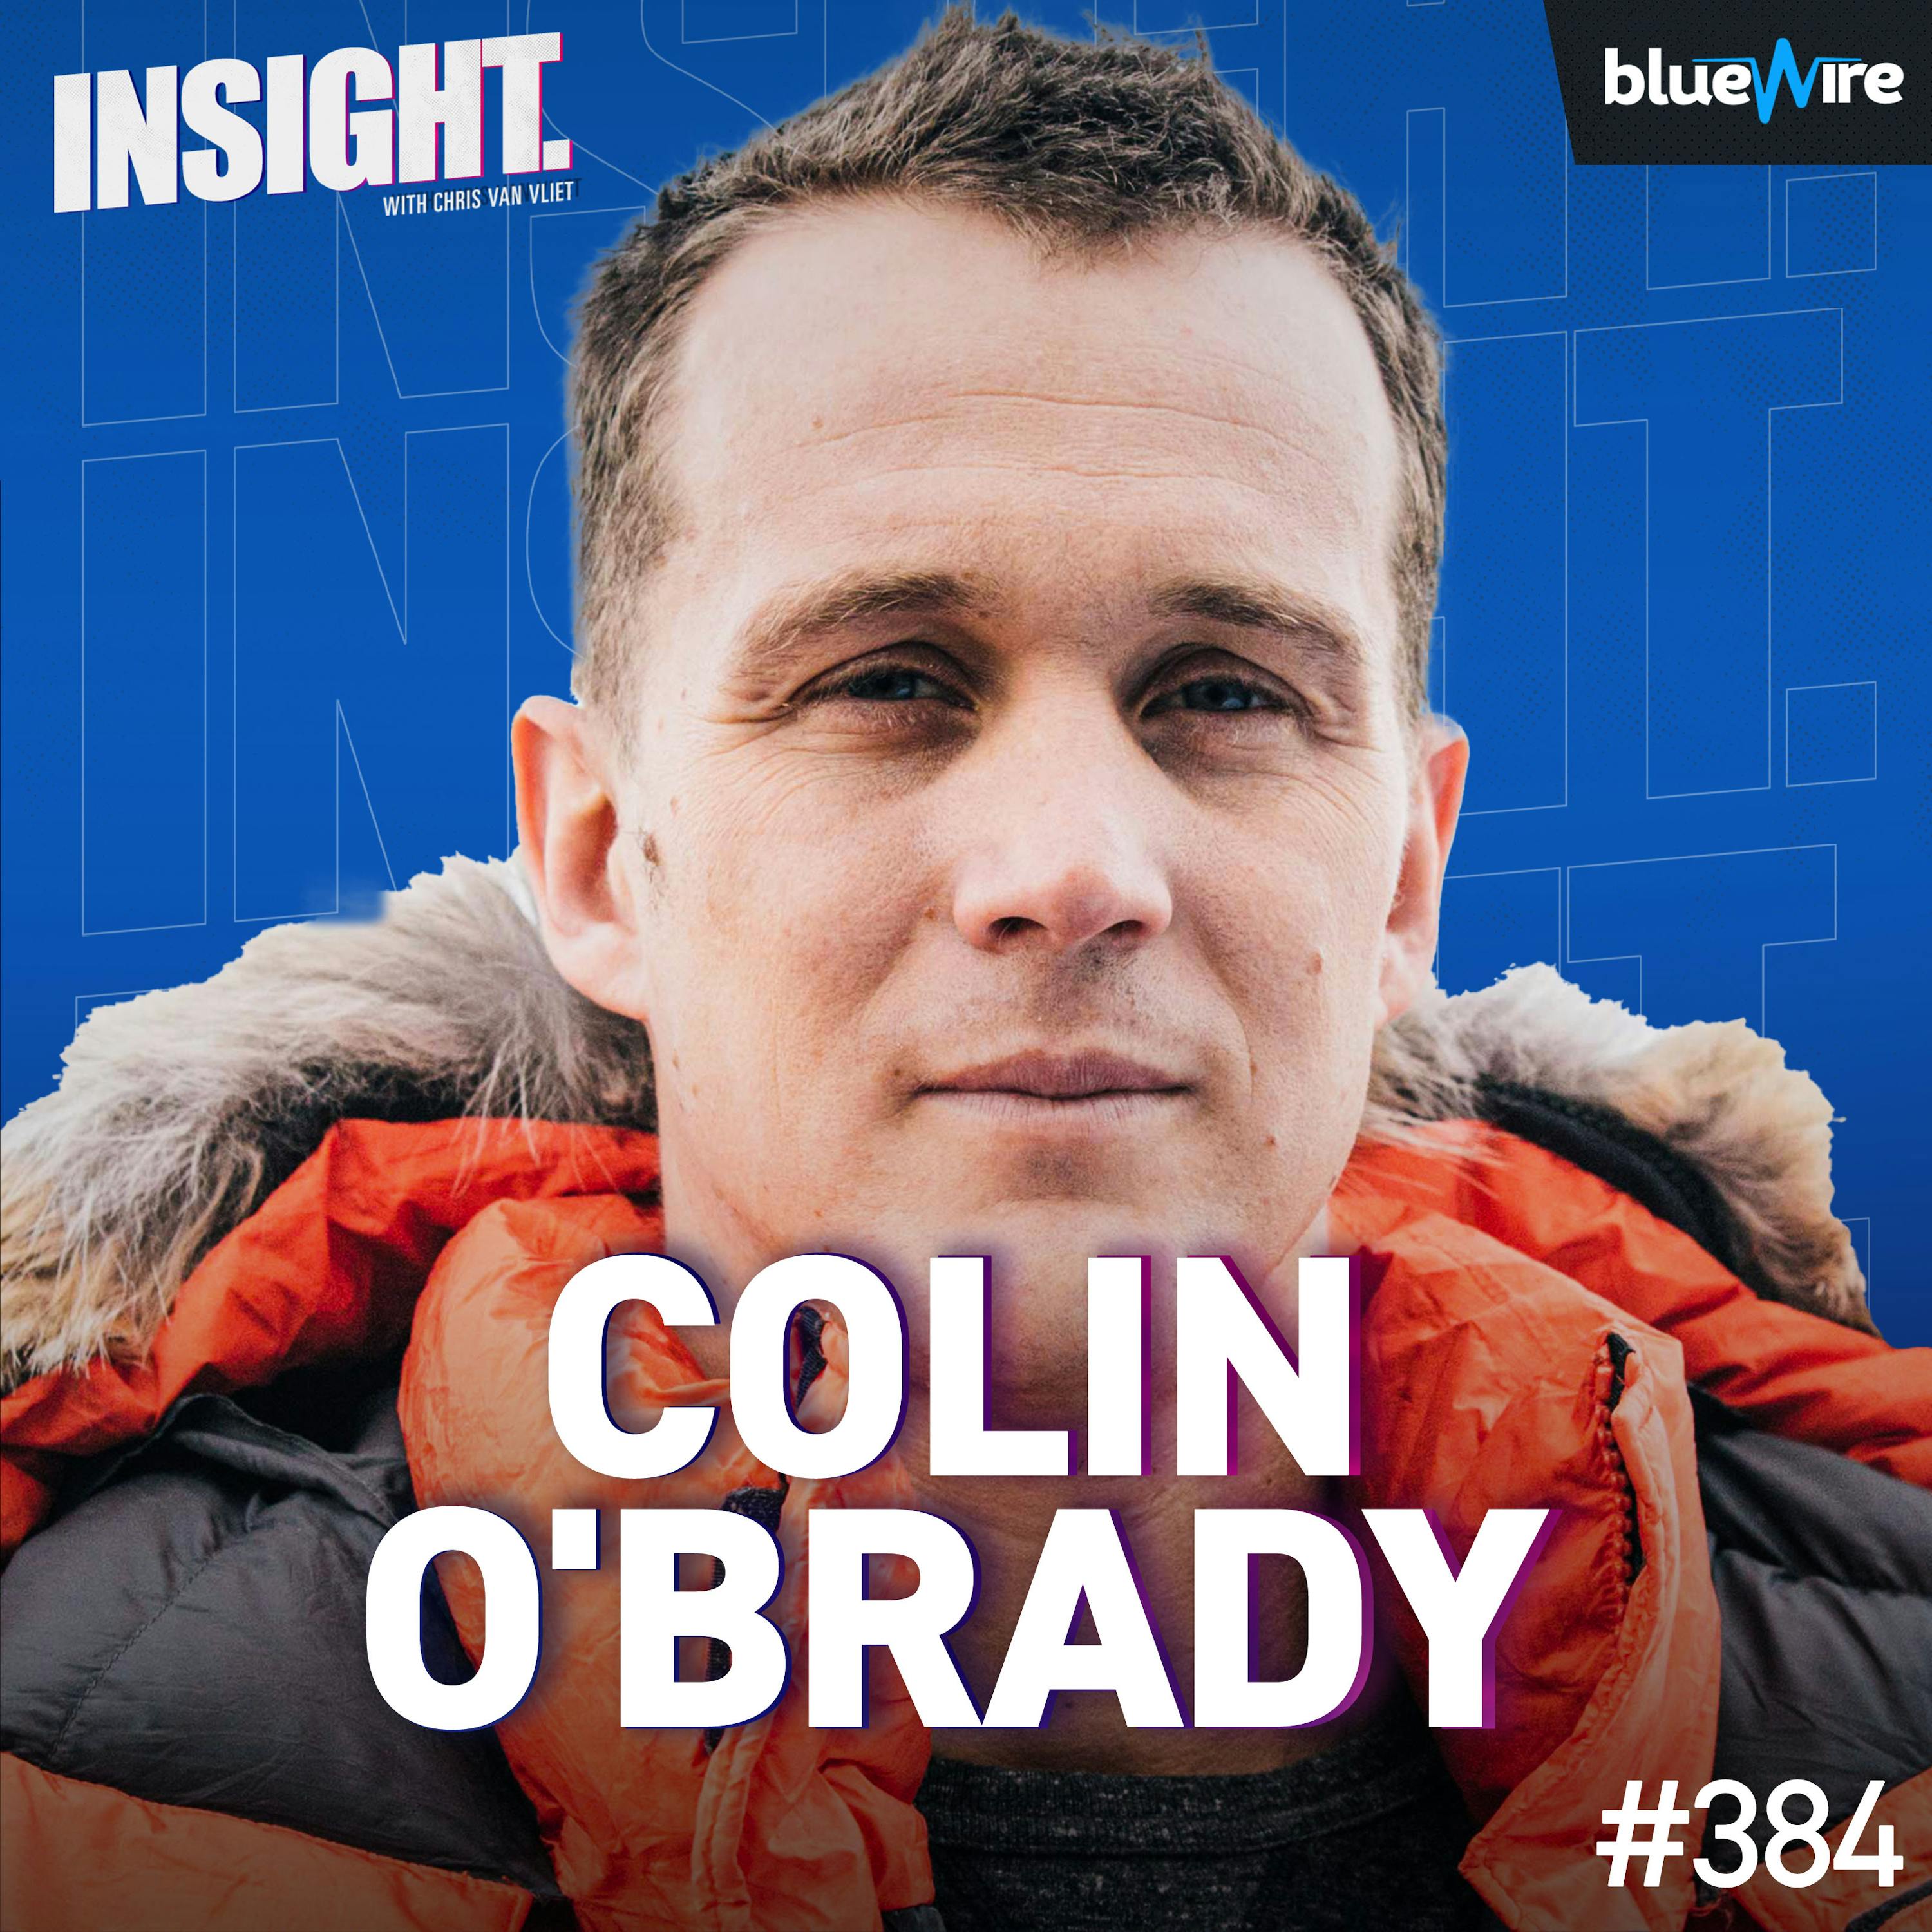 Make The Impossible Possible! Colin O'Brady On Being The First Ever To Cross Antarctica Unassisted And Climbing Mount Everest TWICE!